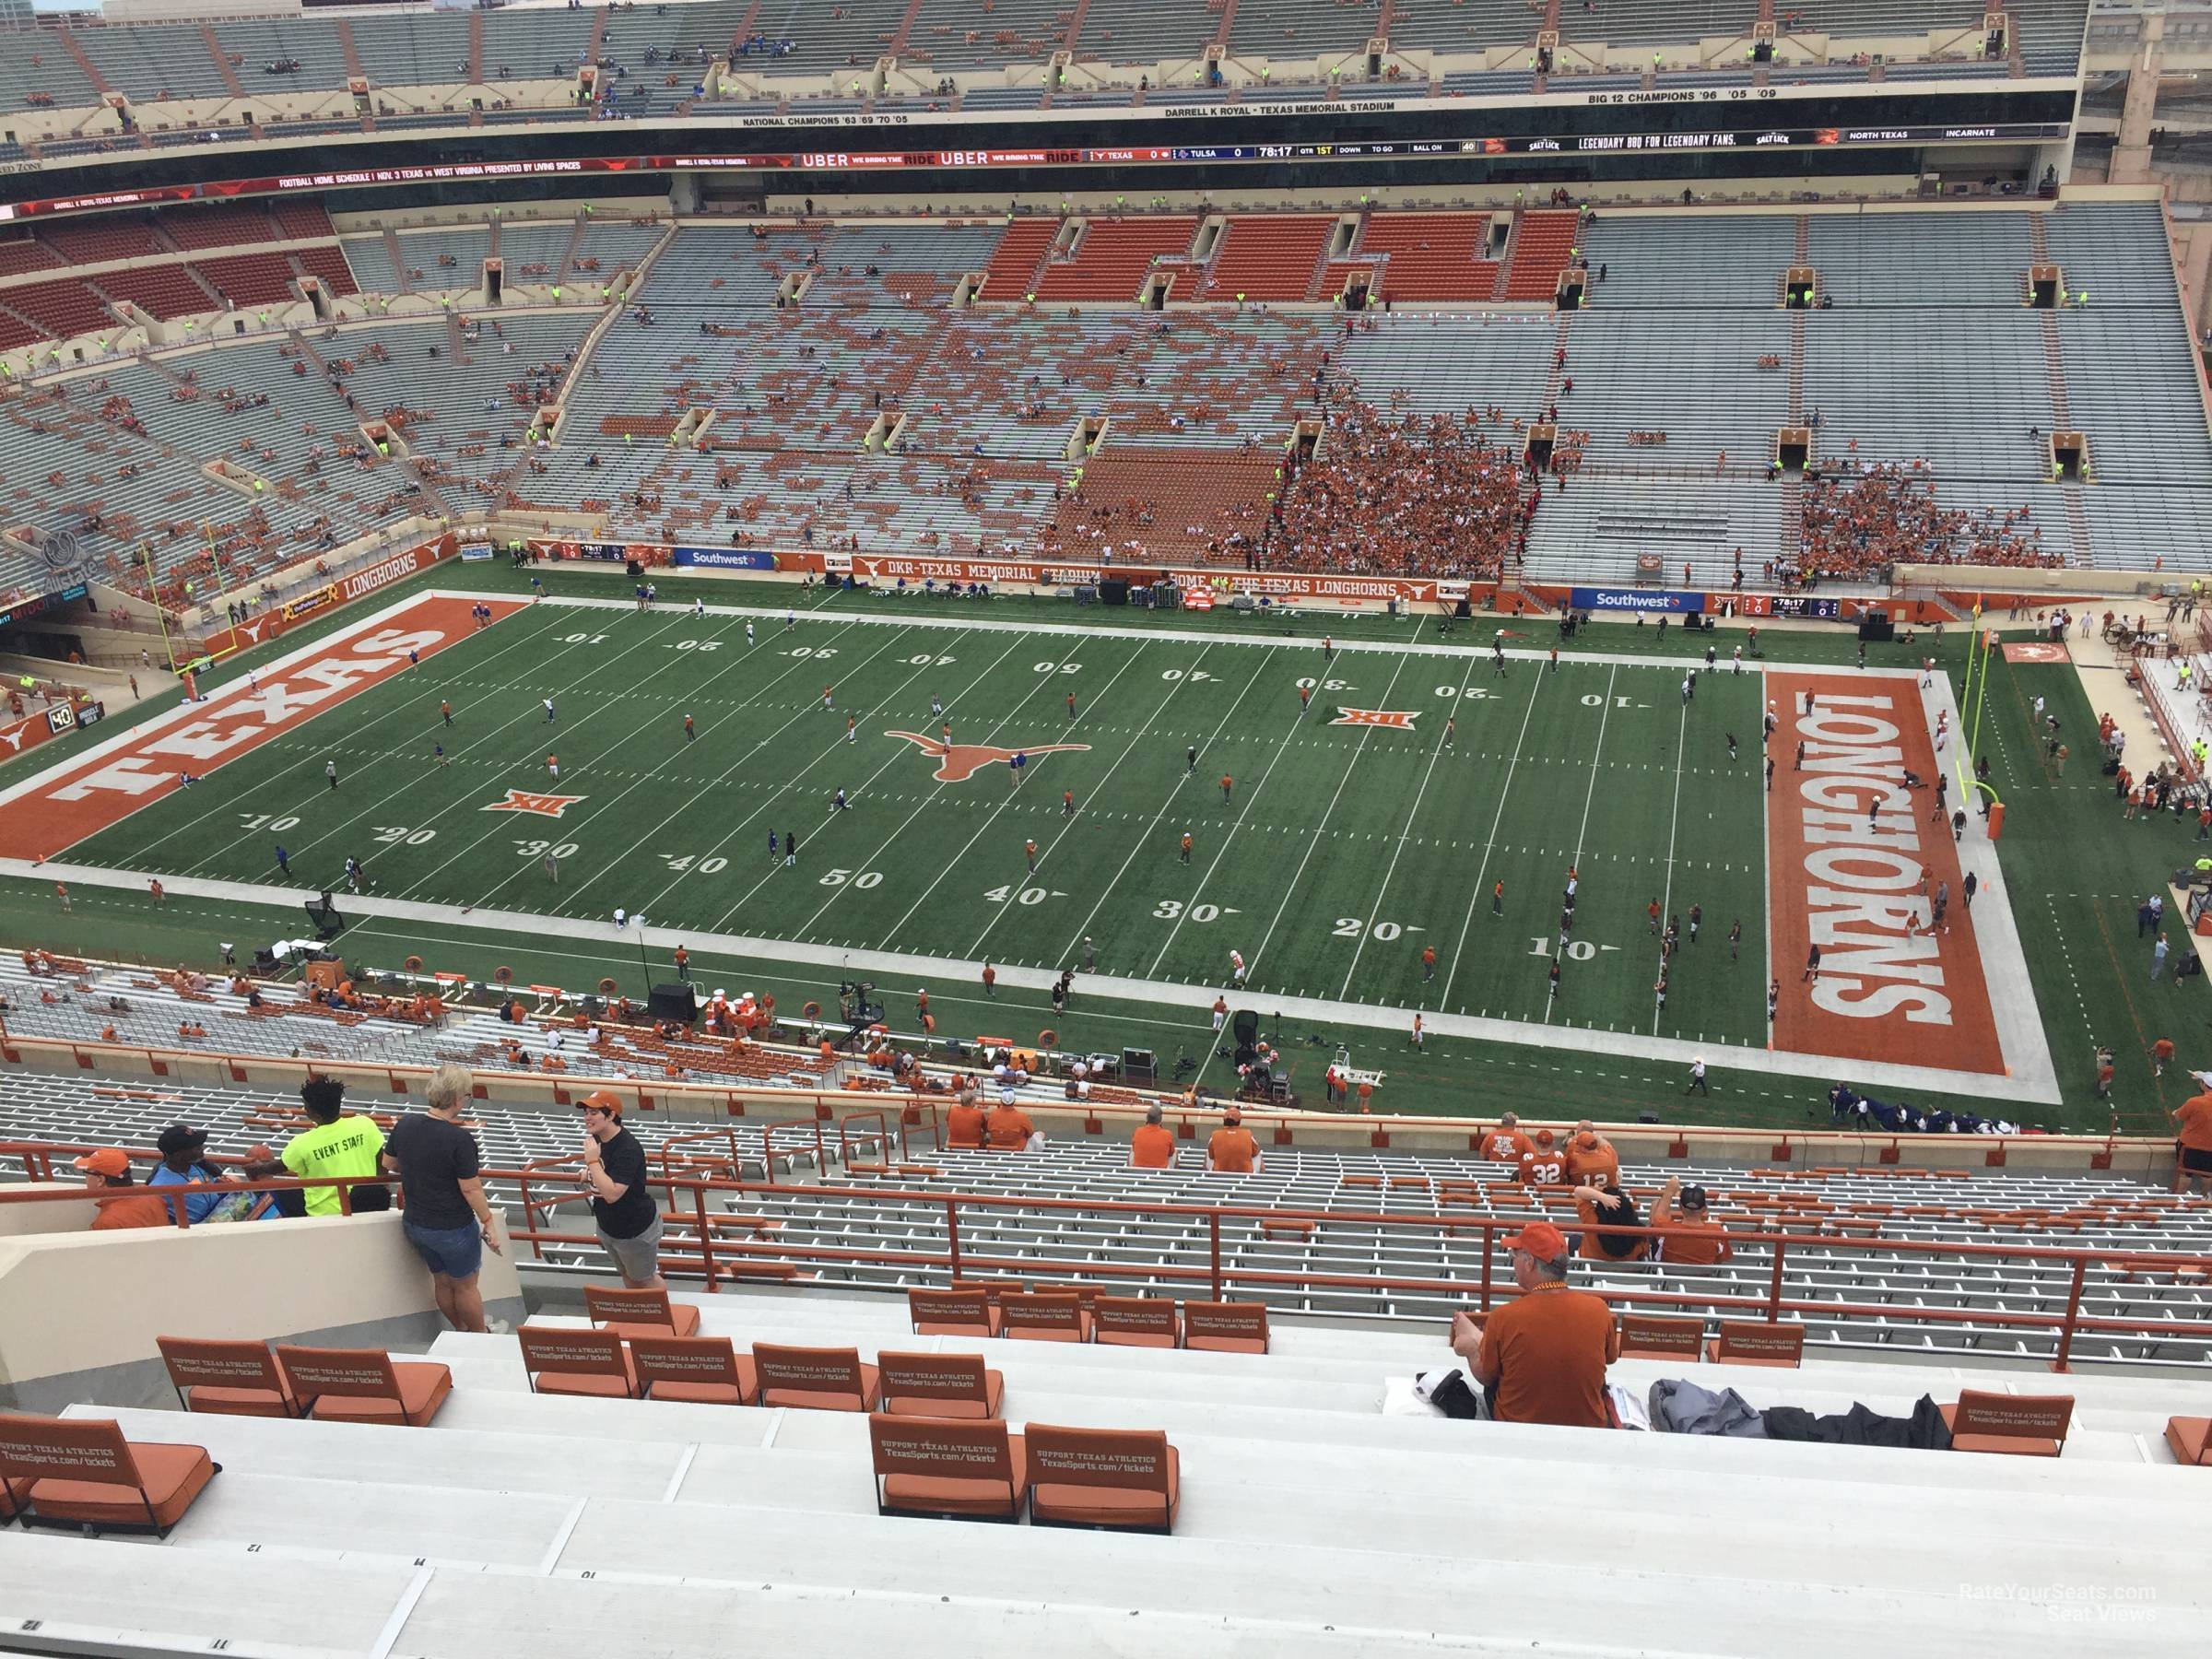 section 102, row 30 seat view  - dkr-texas memorial stadium